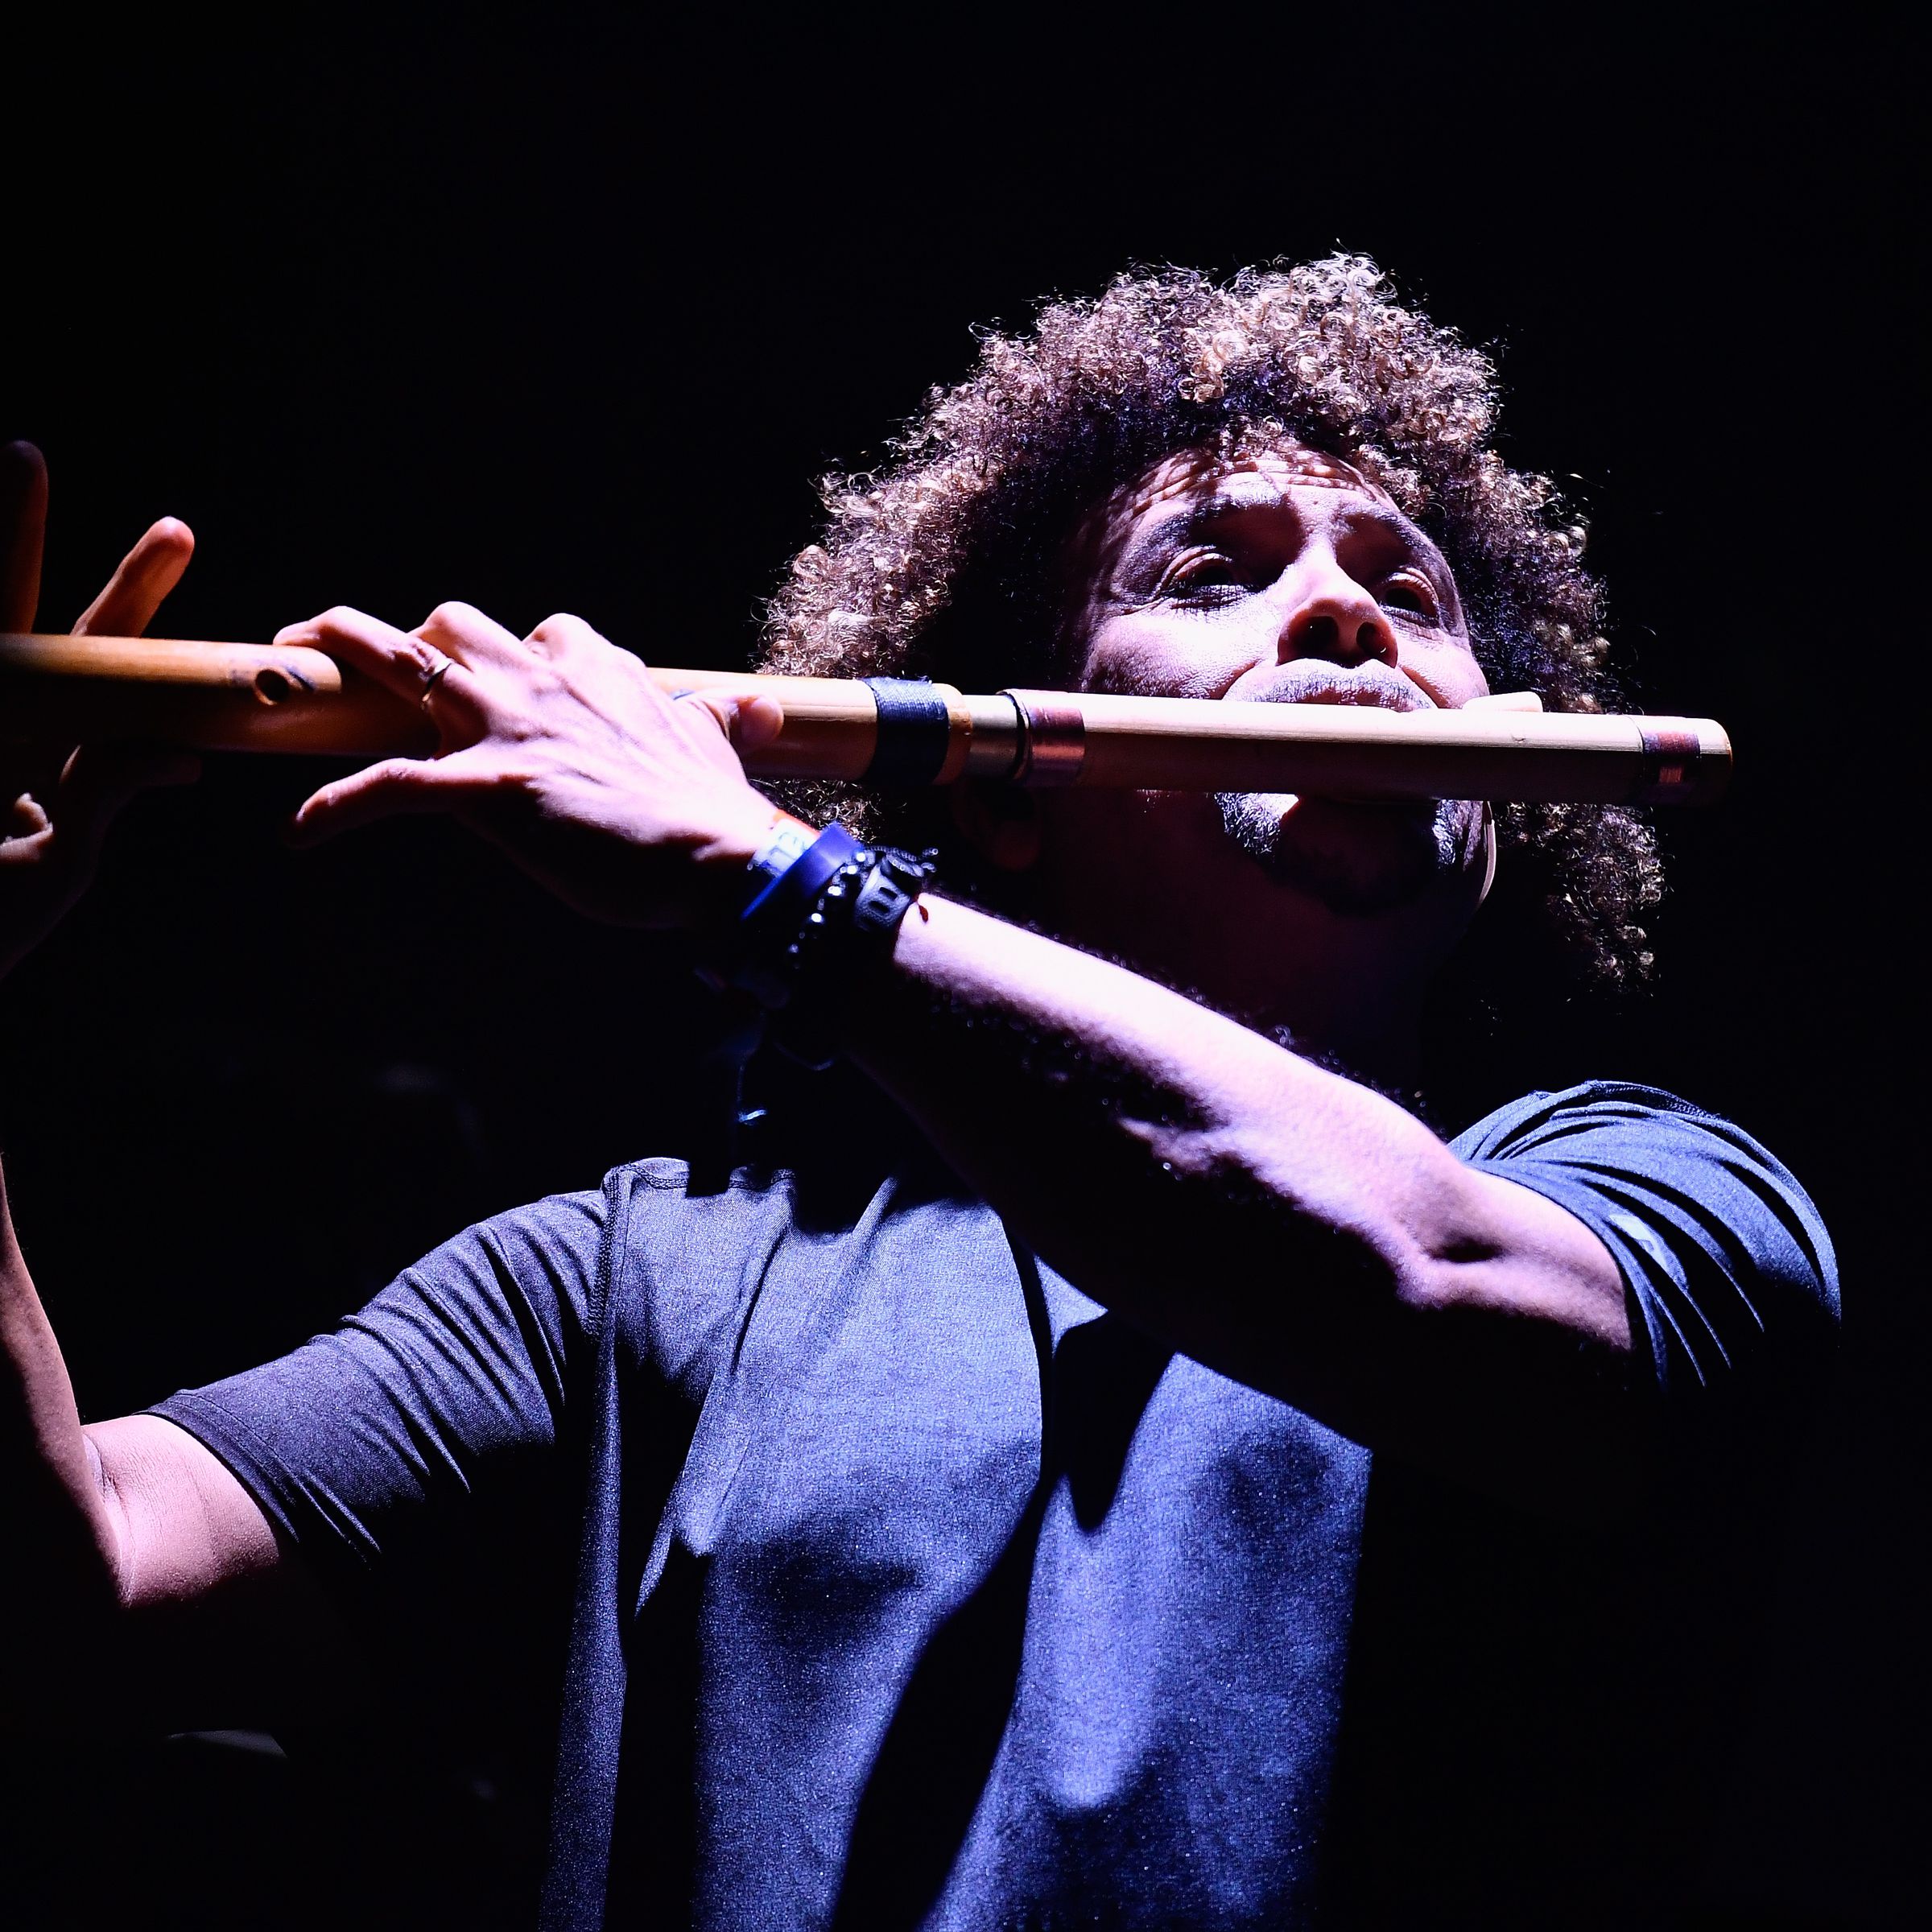 A photo of Pedro Eustache playing the flute